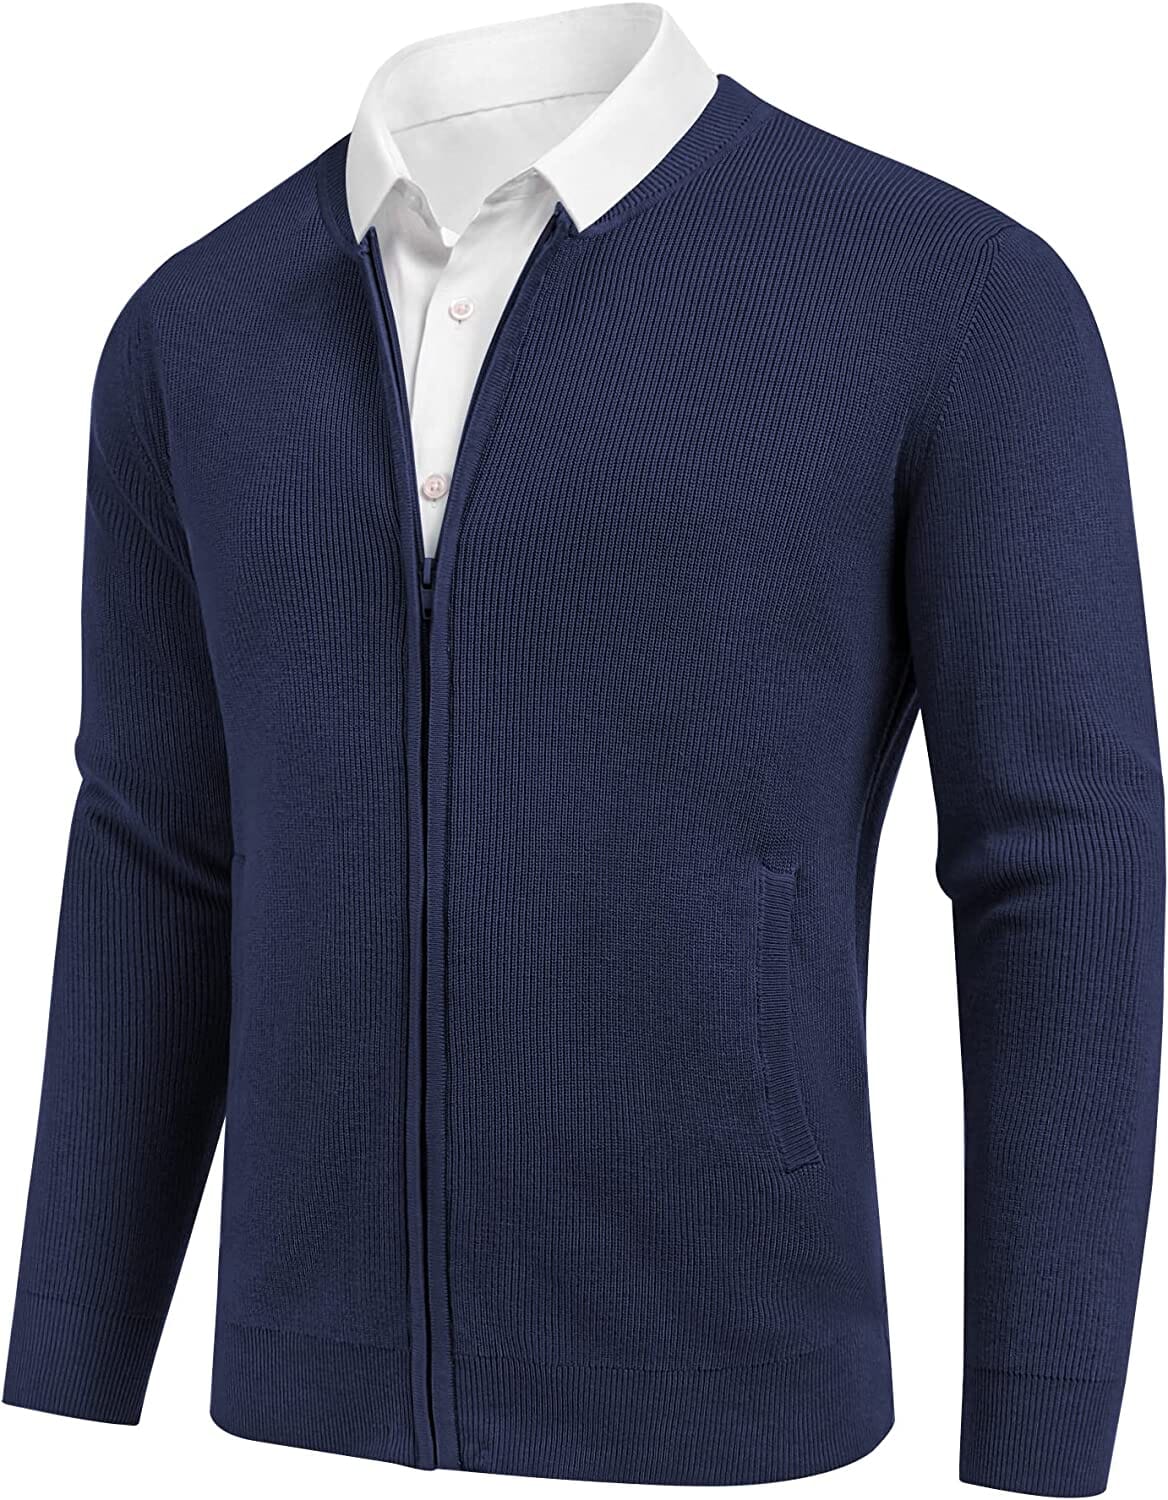 Full Zip Slim Fit Stylish Knitted Cardigan Sweater with Pockets (US Only) Sweaters COOFANDY Store Solid Navy Blue S 